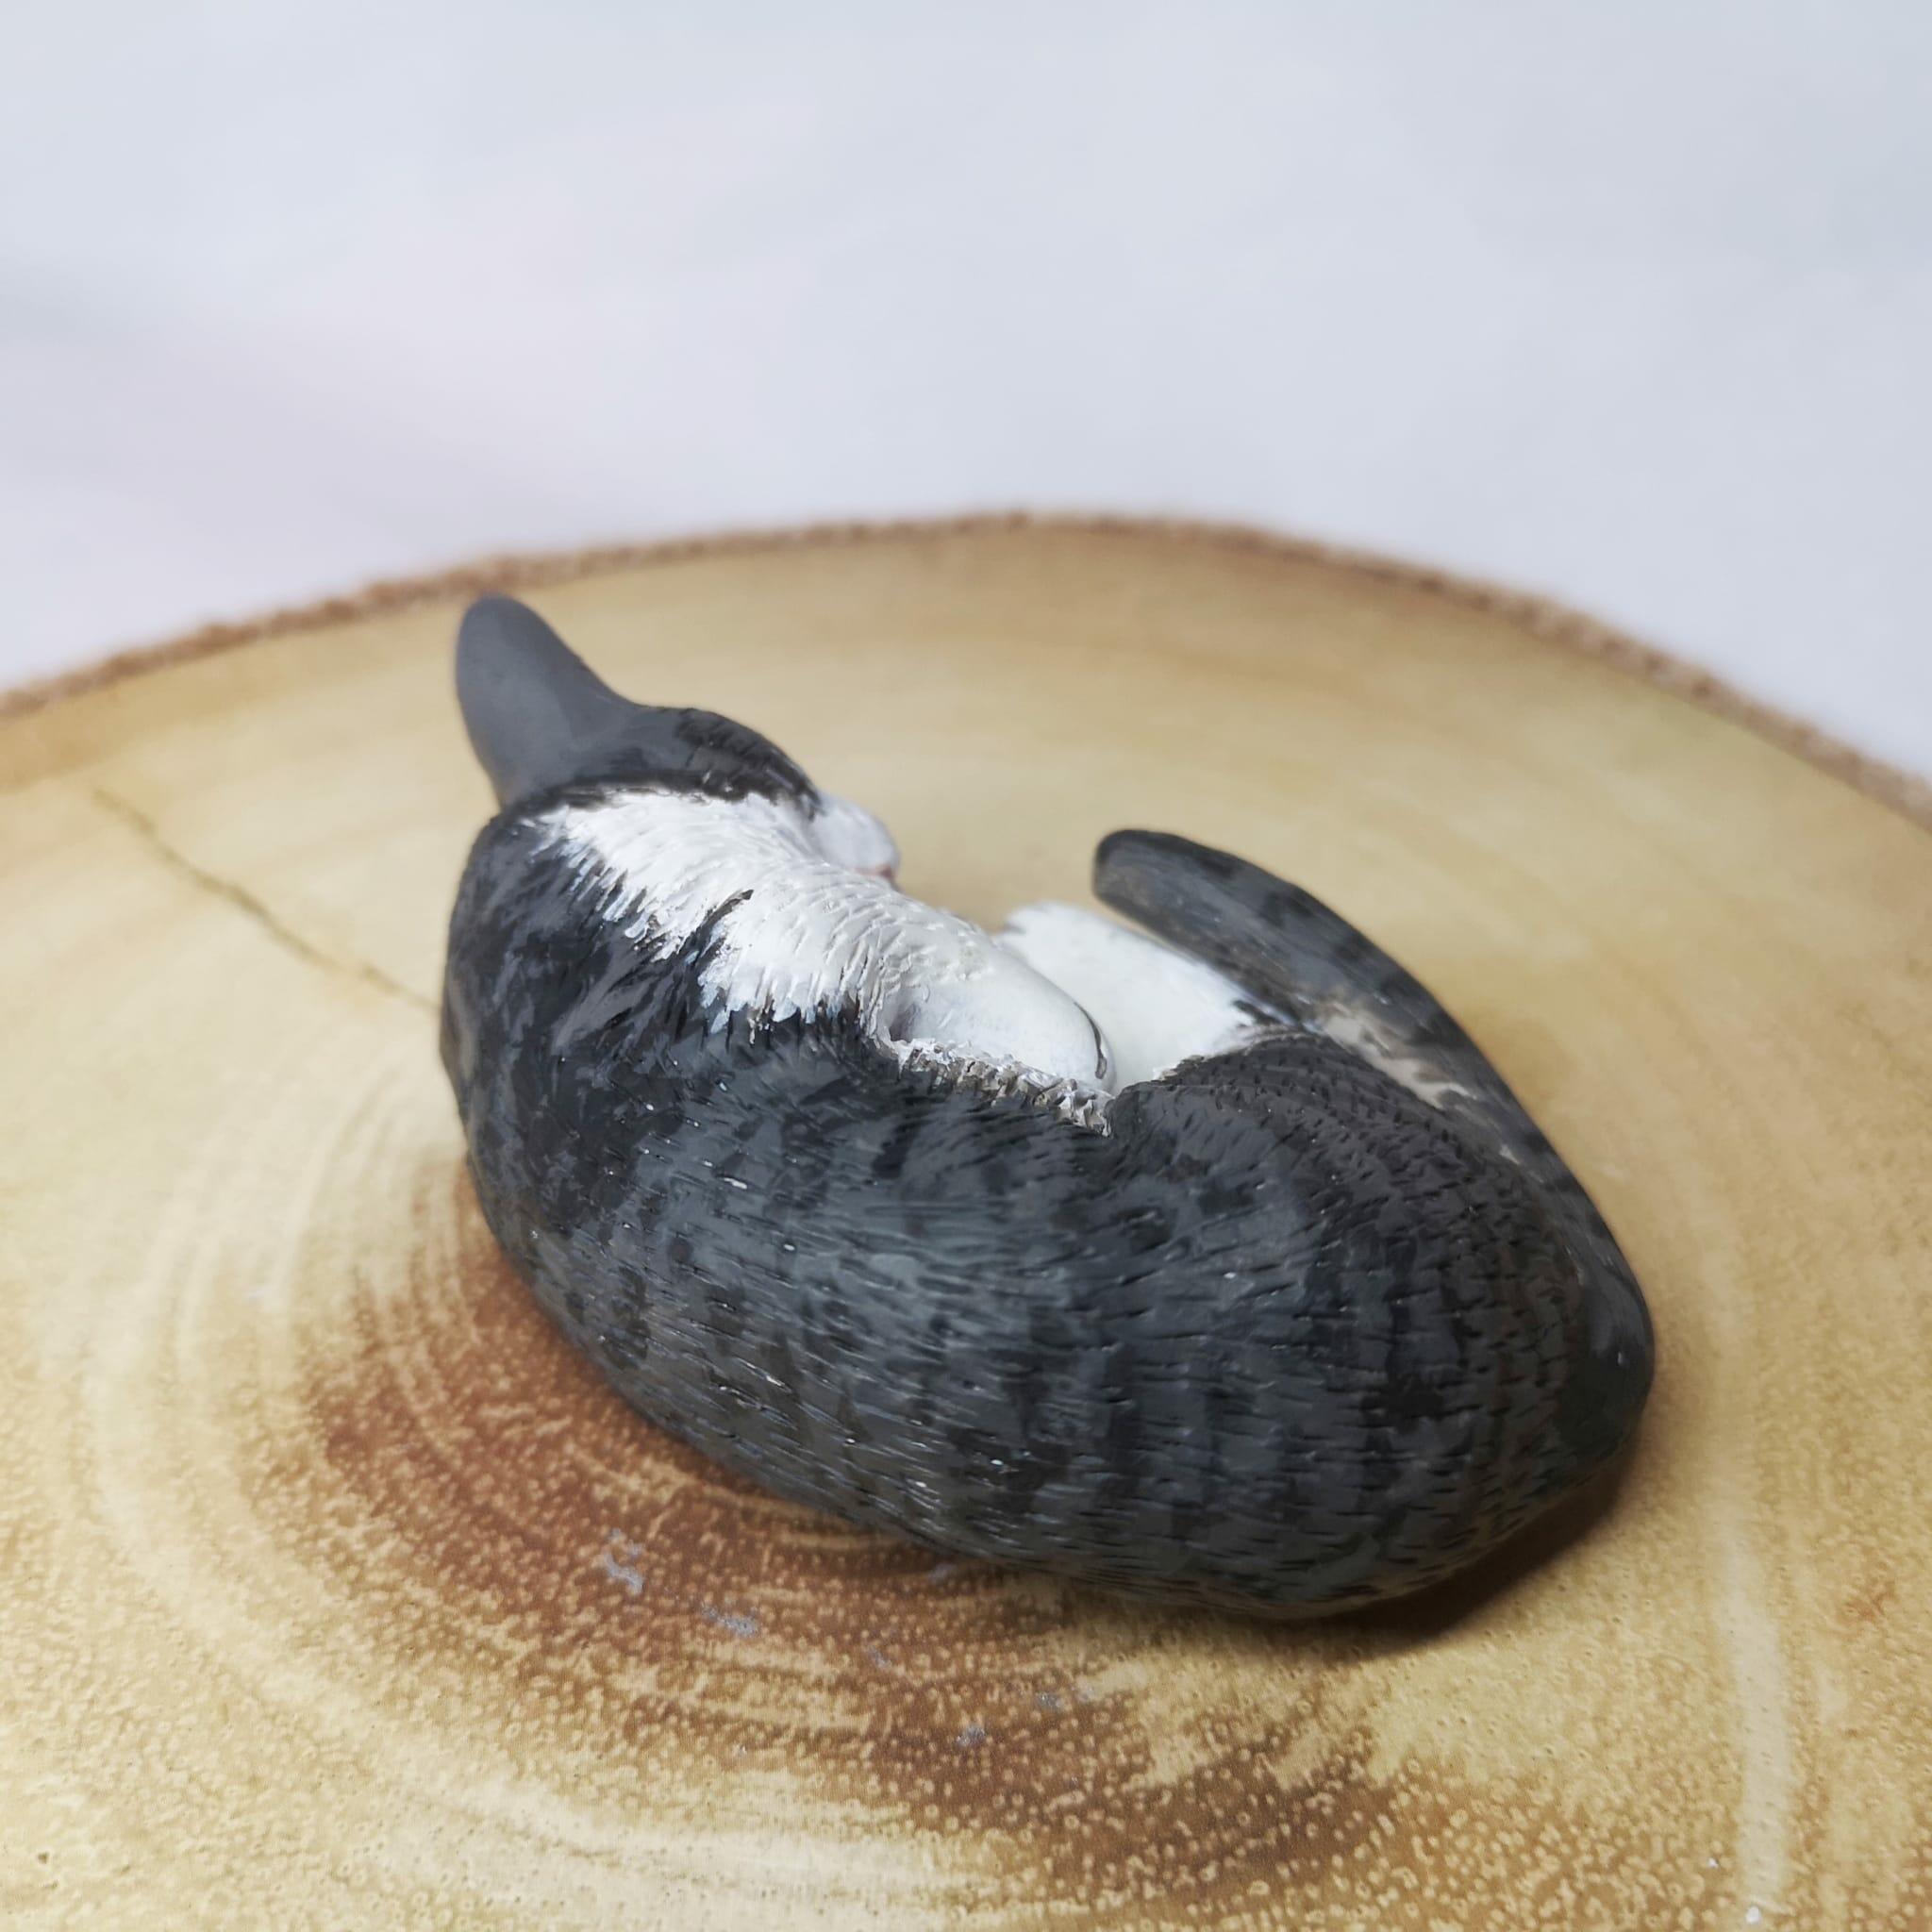 Handmade and handpainted clay model of a cat asleep, showcasing lifelike details and personalized to capture the unique personality of your feline friend.